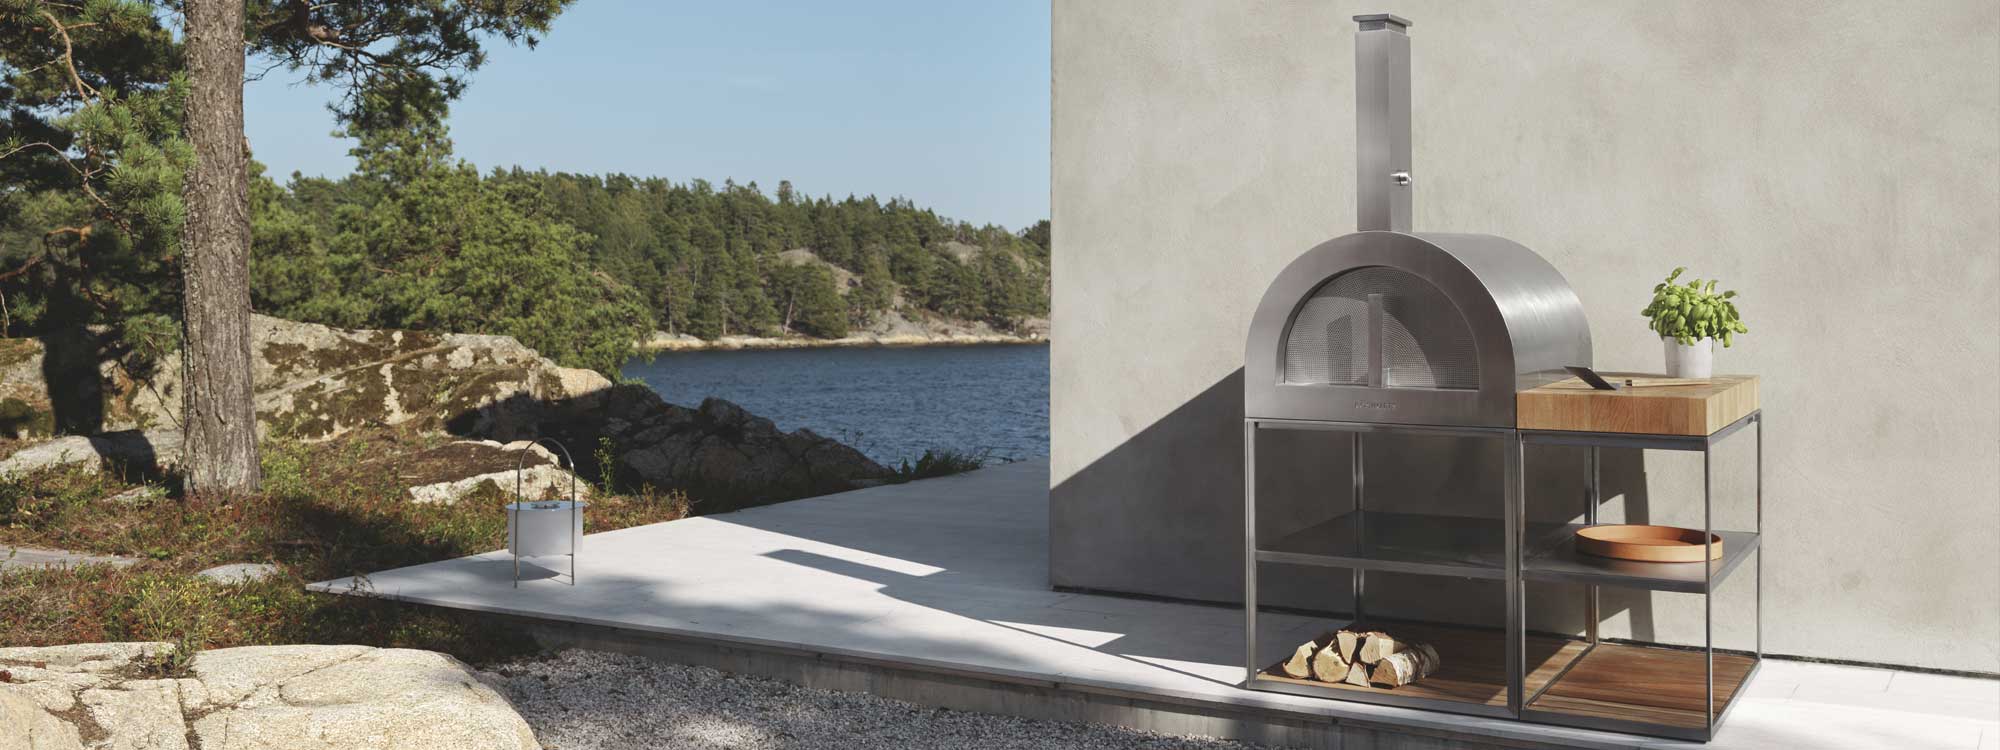 Image of Roshults wood fired pizza oven and outdoor kitchen work top in brushed stainless steel with surfaces in FSC certified teak, shown against side of building, with Swedish lake and woodland in the background